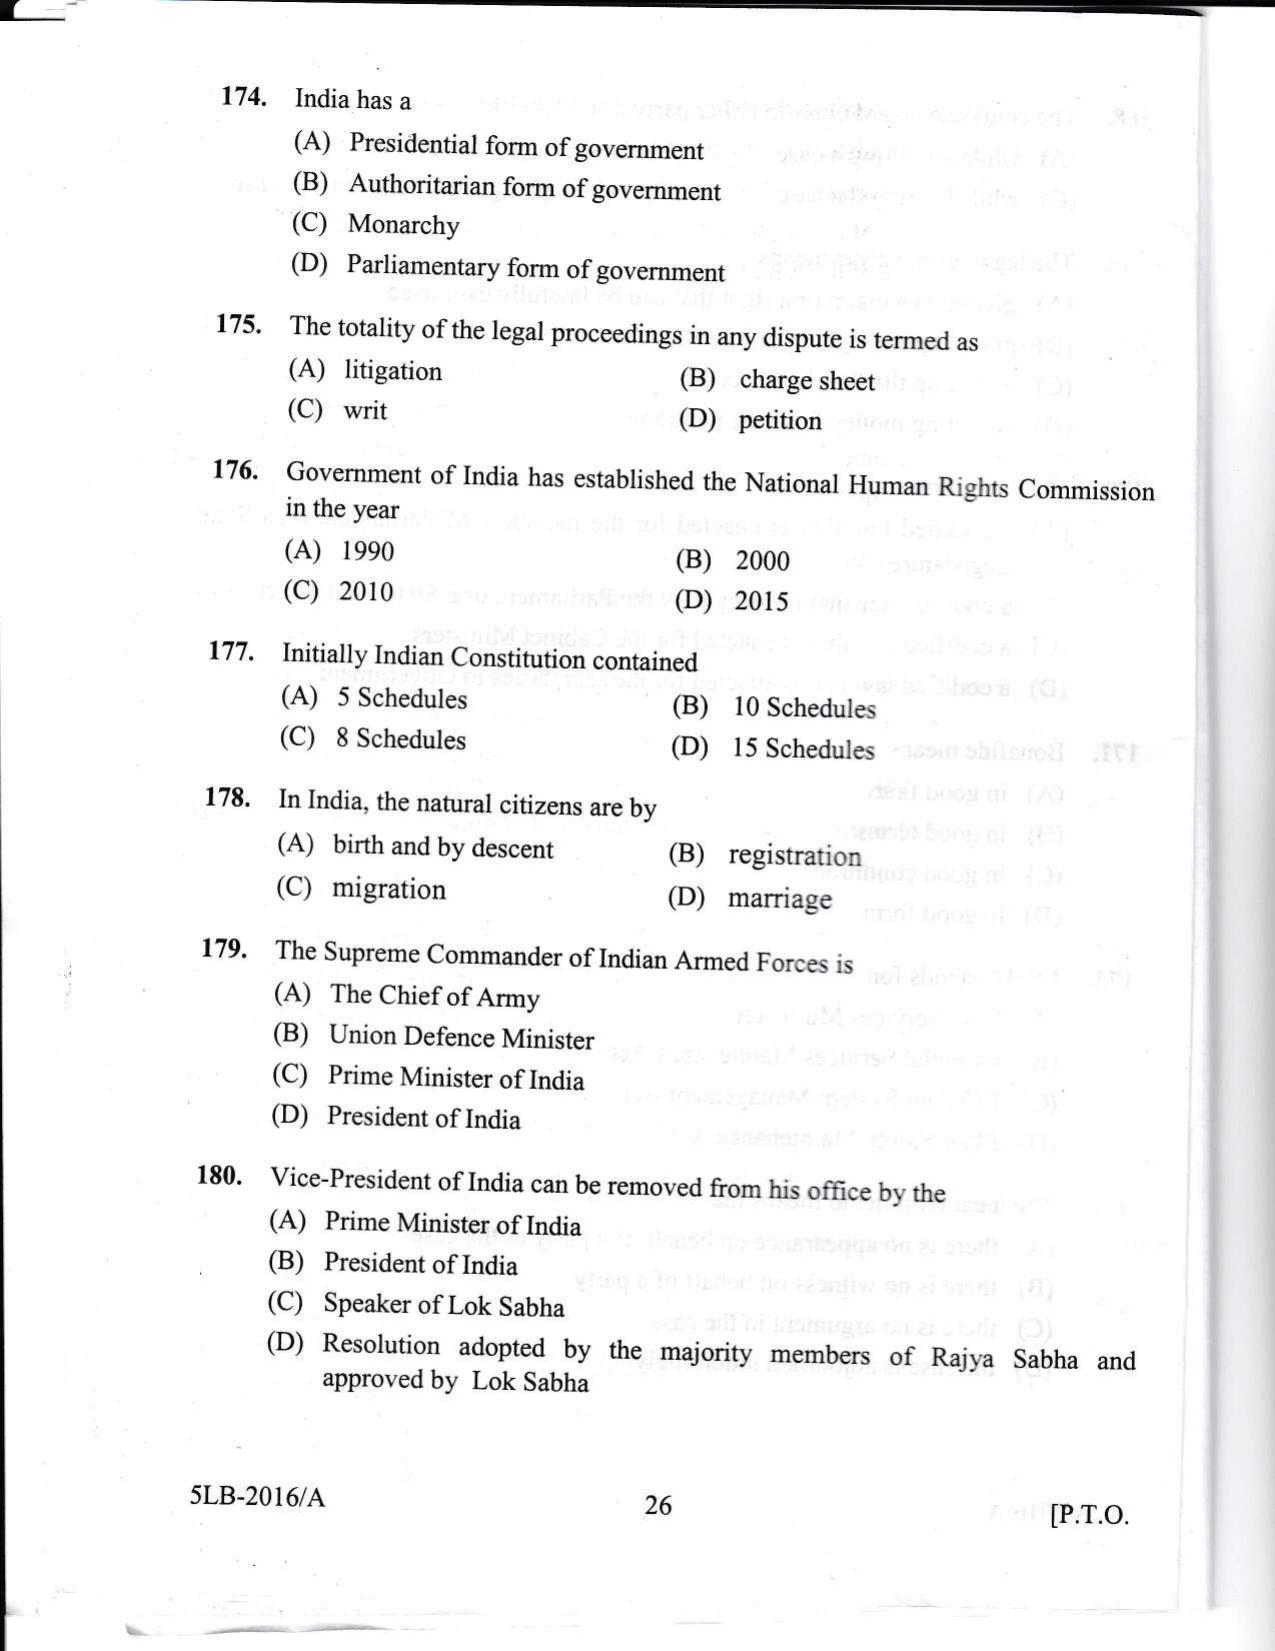 KLEE 5 Year LLB Exam 2016 Question Paper - Page 26